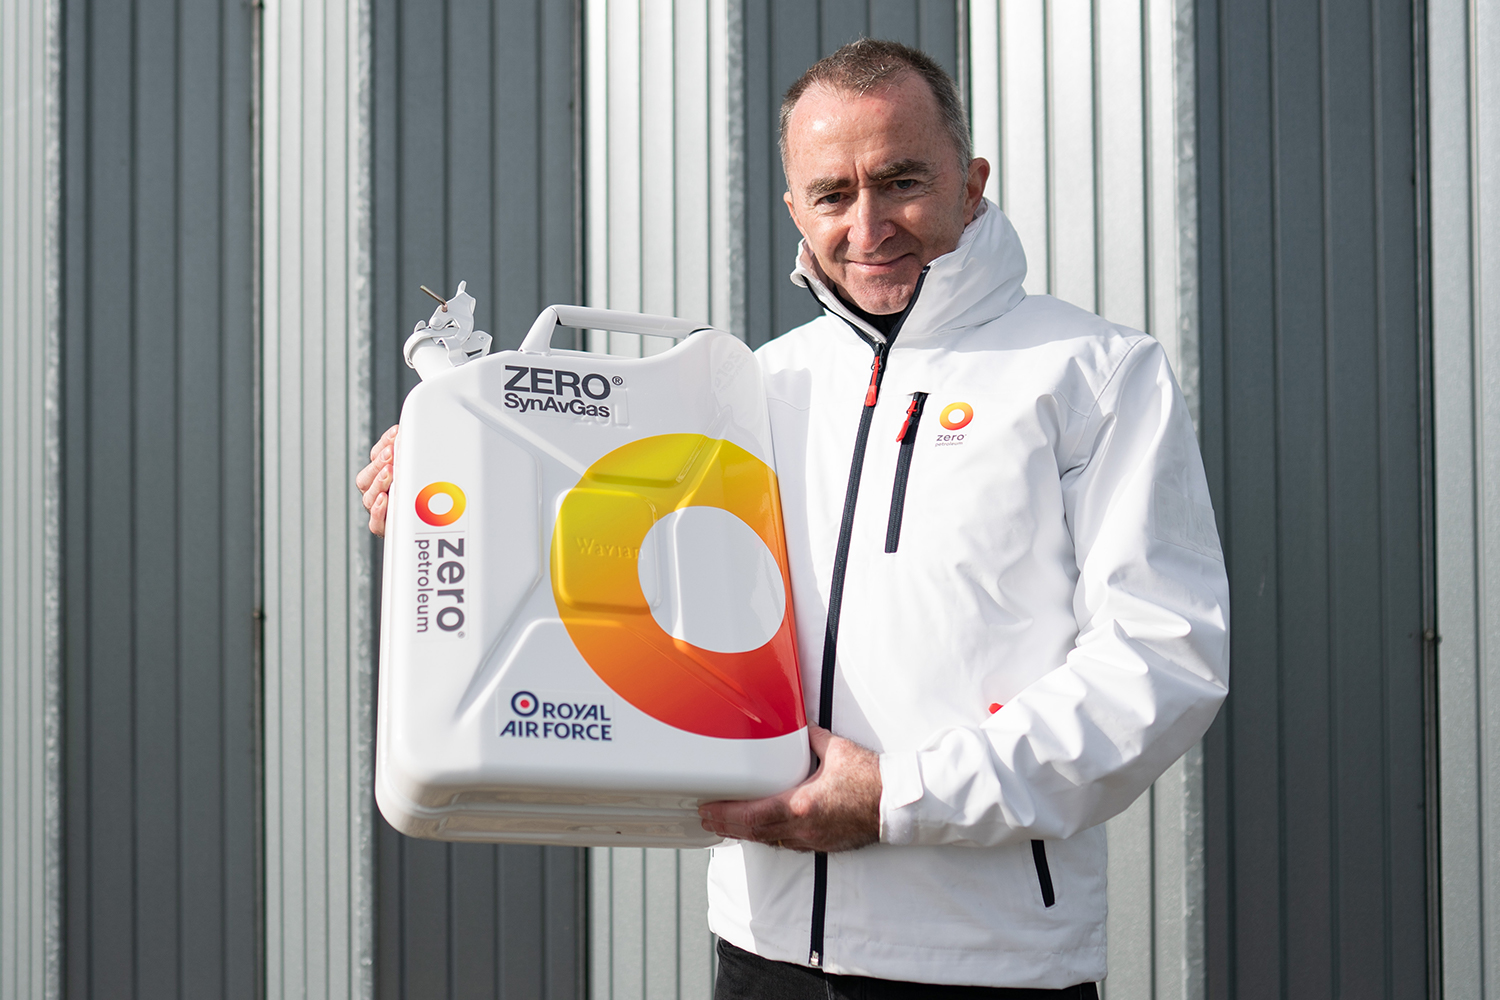 Paddy Lowe, formerly of Formula 1, holding a jerrycan from Zero Petroleum, his synthetic fuel company